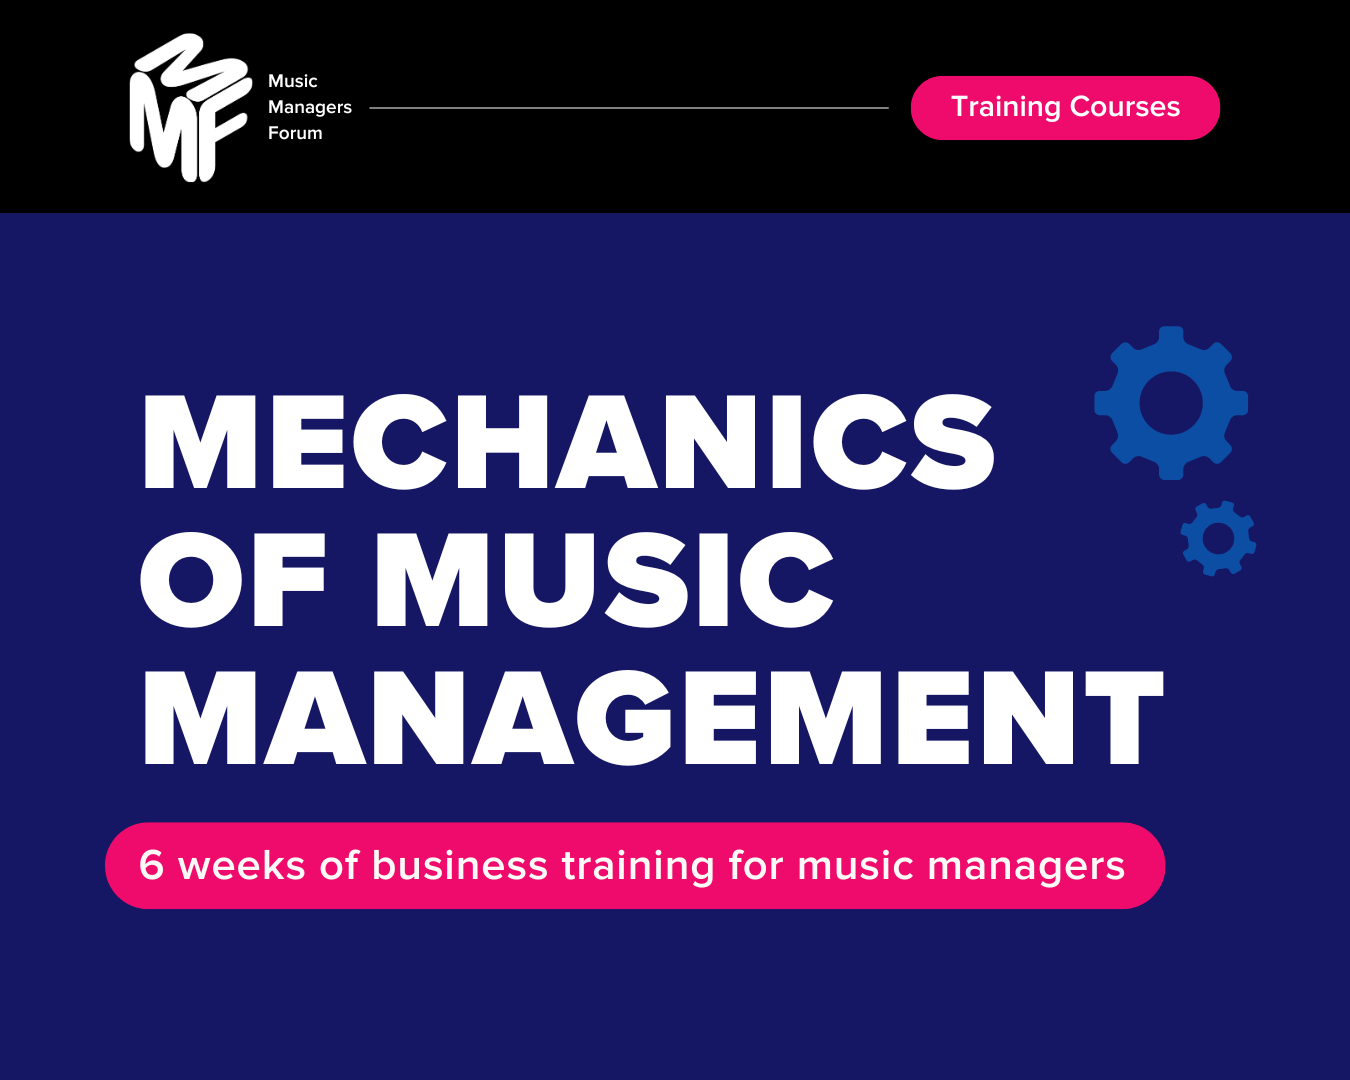 Mechanics of Music Management: BUILDING, GROWING AND MANAGING A FANBASE